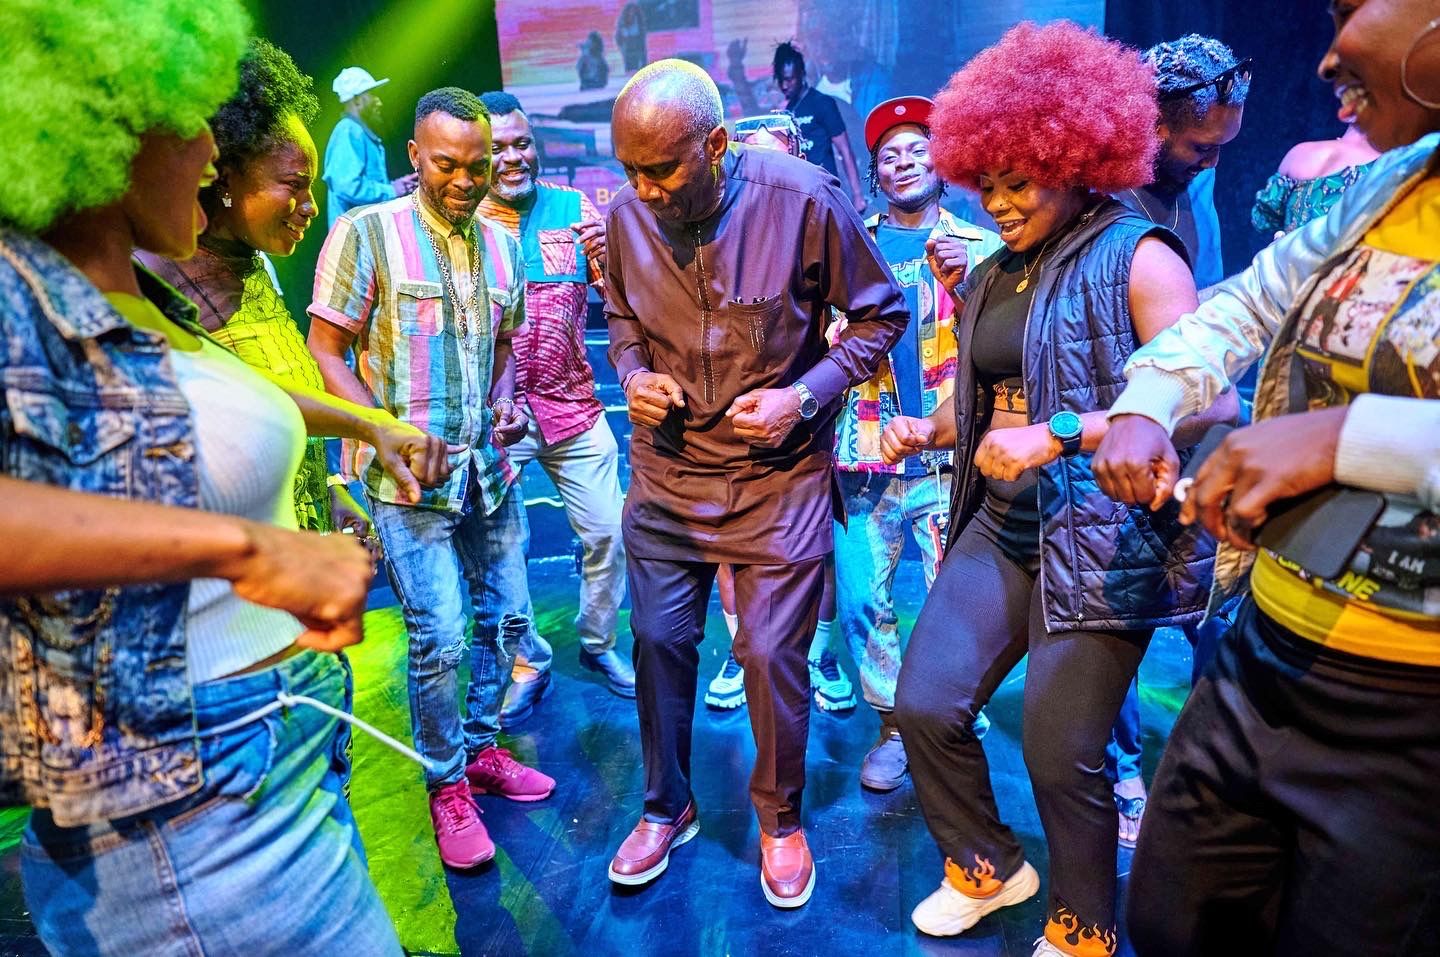 MTN Nigeria Chairman takes to the dance floor